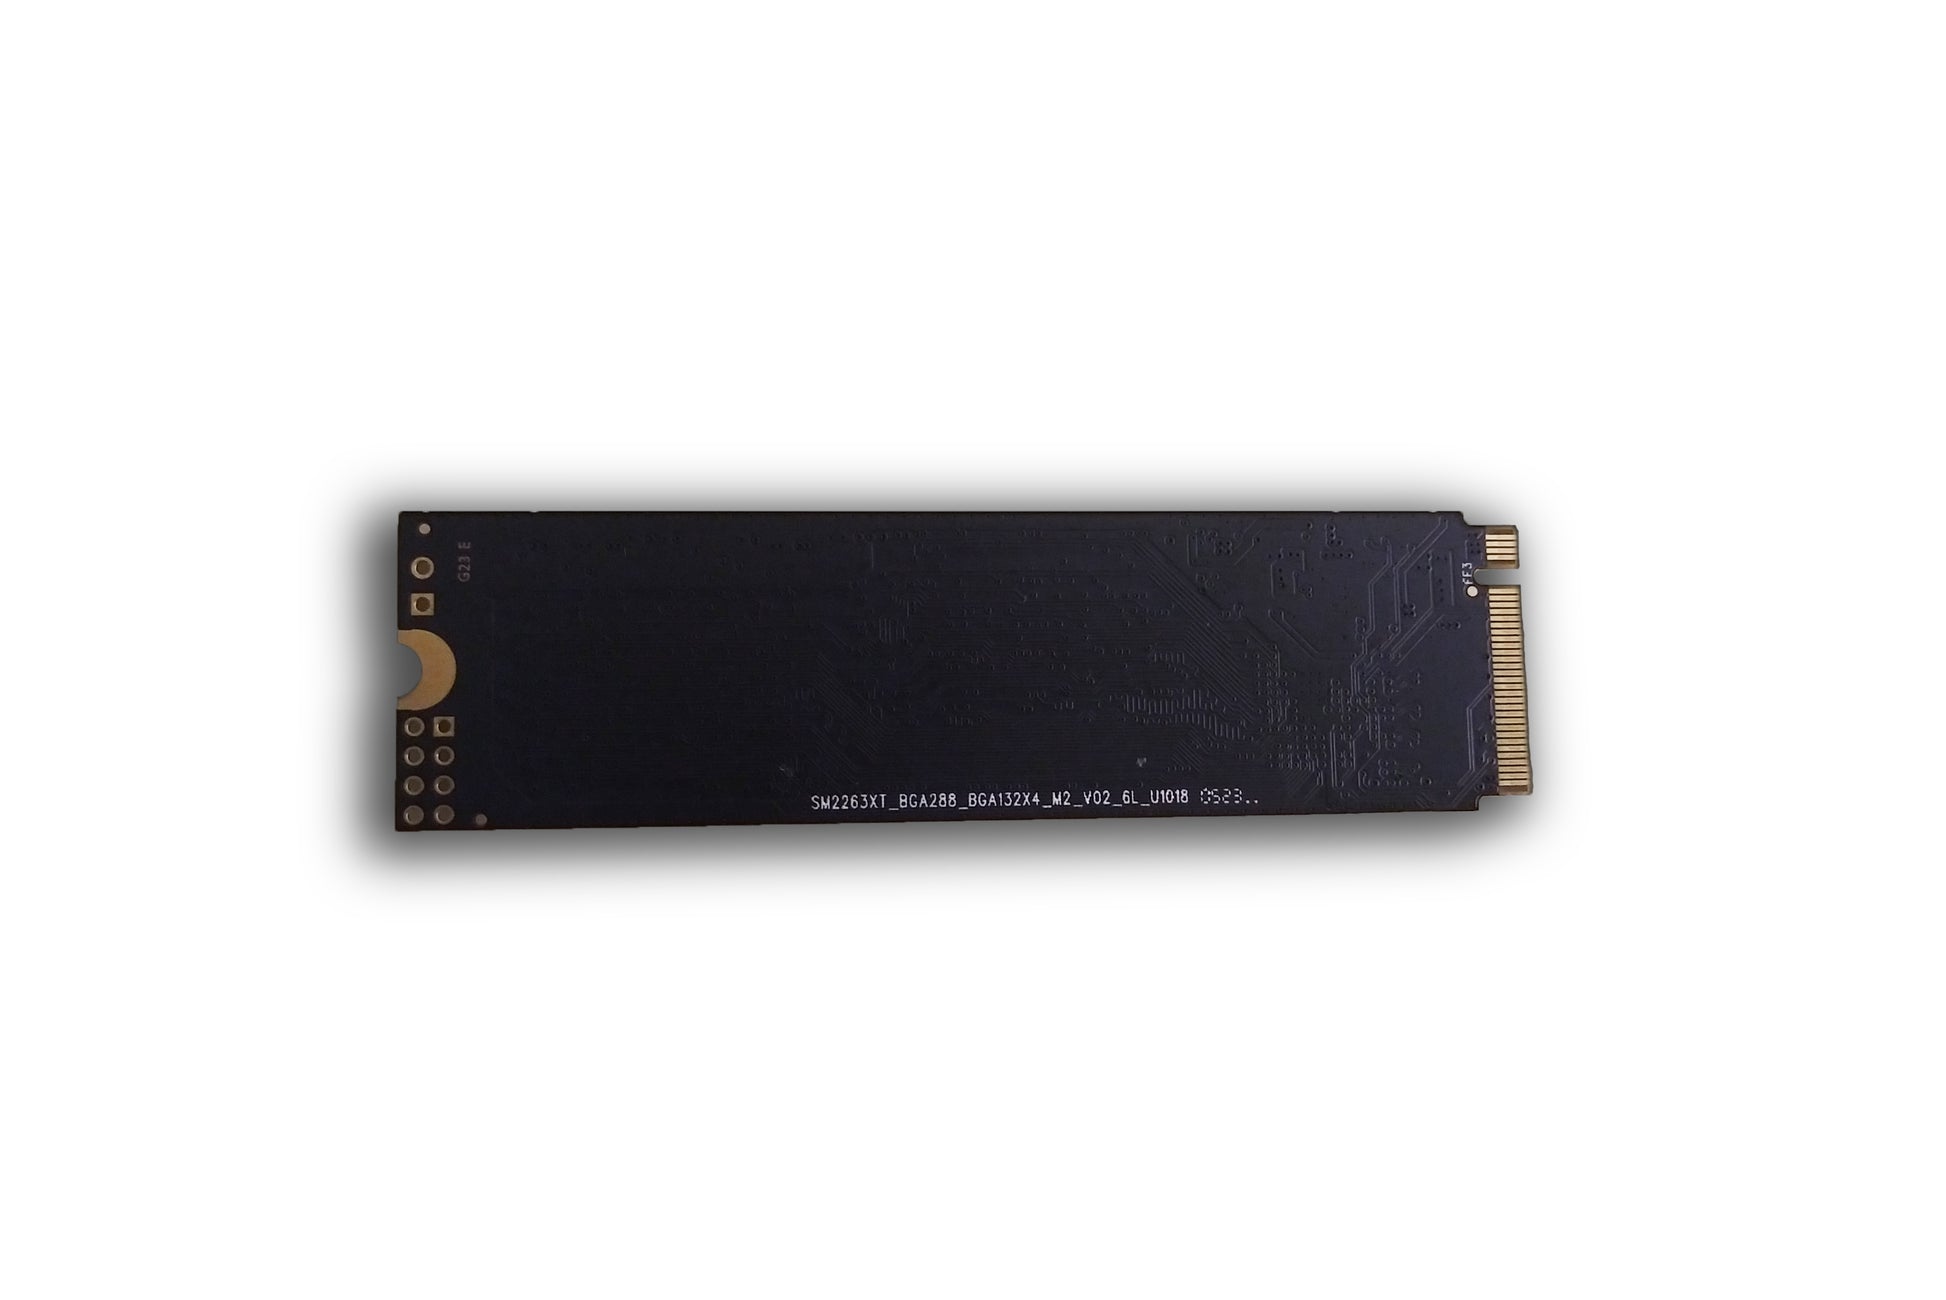 Back view of the 1TB M.2 NVME SSD